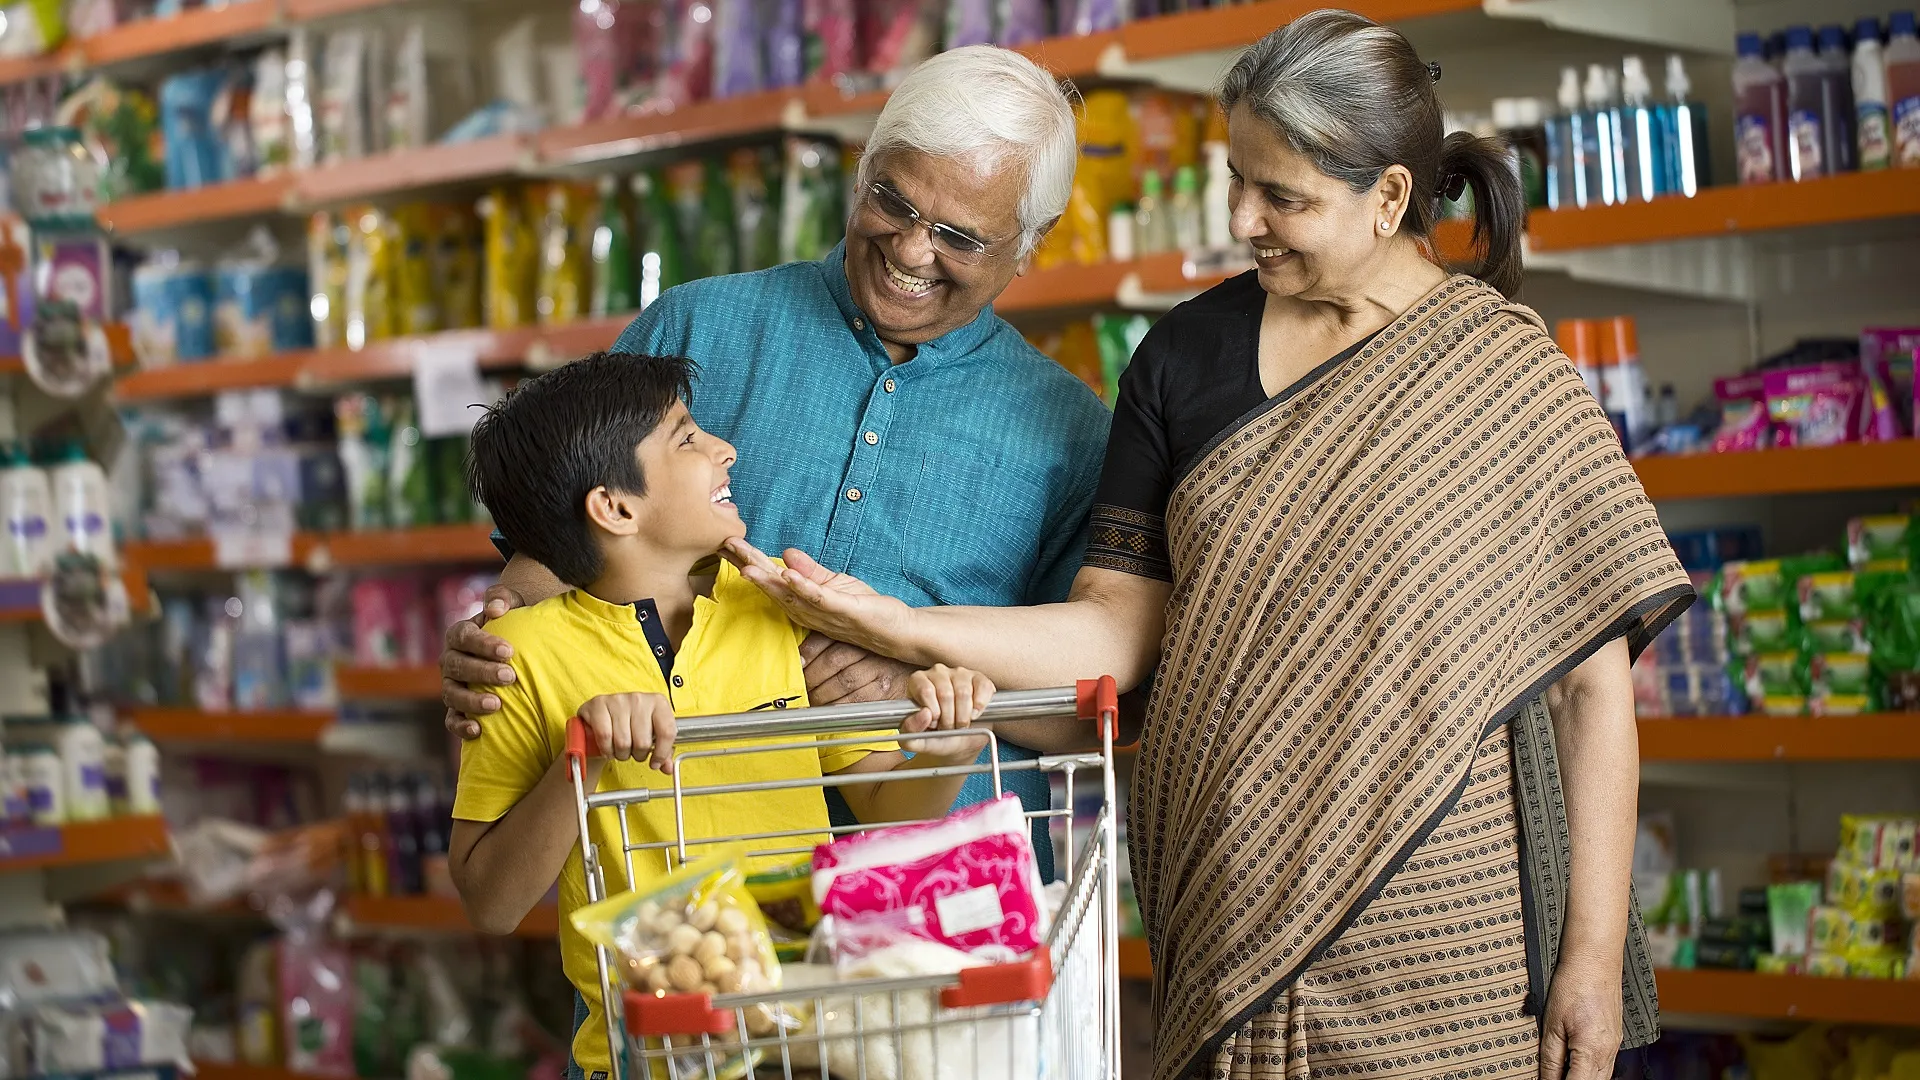 Grandparents with grandson shopping in supermarket stock photo